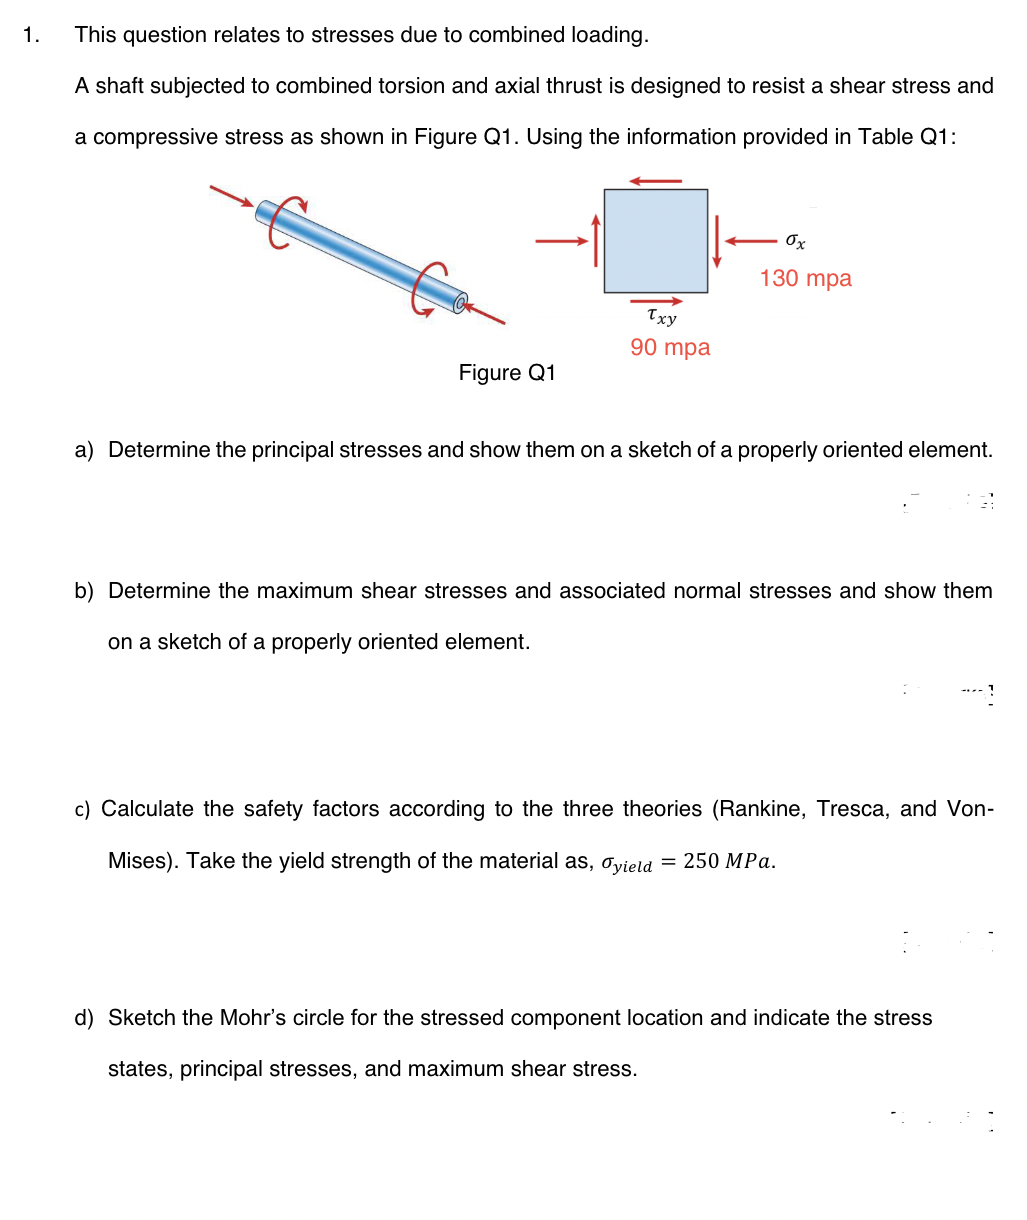 1.
This question relates to stresses due to combined loading.
A shaft subjected to combined torsion and axial thrust is designed to resist a shear stress and
a compressive stress as shown in Figure Q1. Using the information provided in Table Q1:
Figure Q1
Txy
90 mpa
ox
130 mpa
a) Determine the principal stresses and show them on a sketch of a properly oriented element.
b) Determine the maximum shear stresses and associated normal stresses and show them
on a sketch of a properly oriented element.
c) Calculate the safety factors according to the three theories (Rankine, Tresca, and Von-
Mises). Take the yield strength of the material as, Oyield = 250 MPa.
d) Sketch the Mohr's circle for the stressed component location and indicate the stress
states, principal stresses, and maximum shear stress.